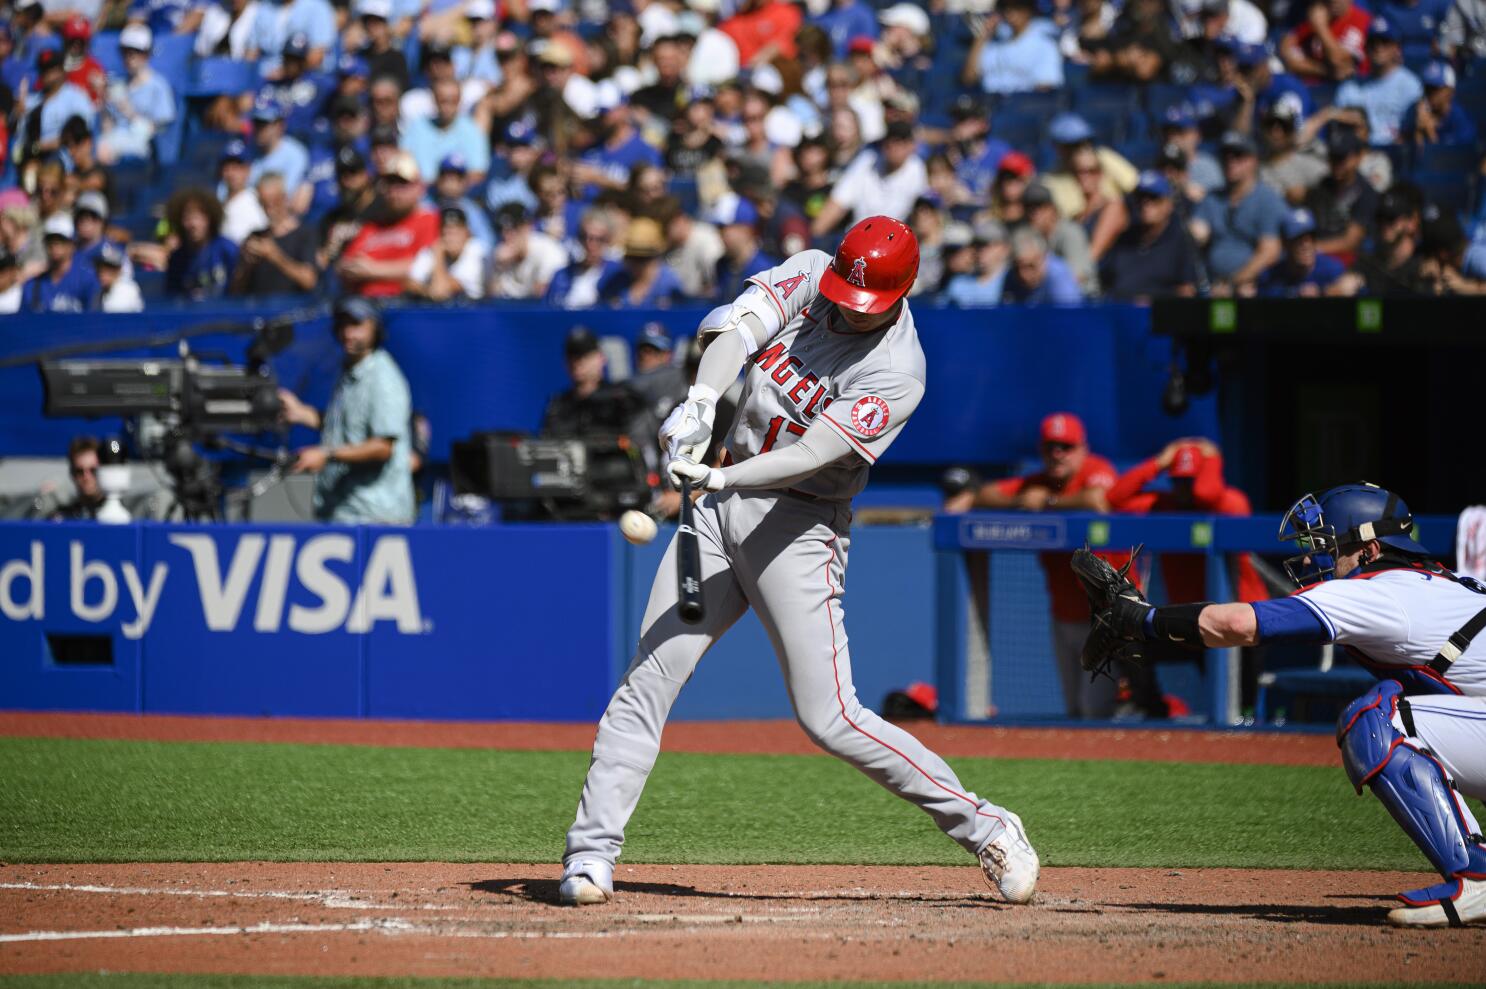 Canada's Tyler O'Neill homers for 3rd straight game as Cardinals beat Royals